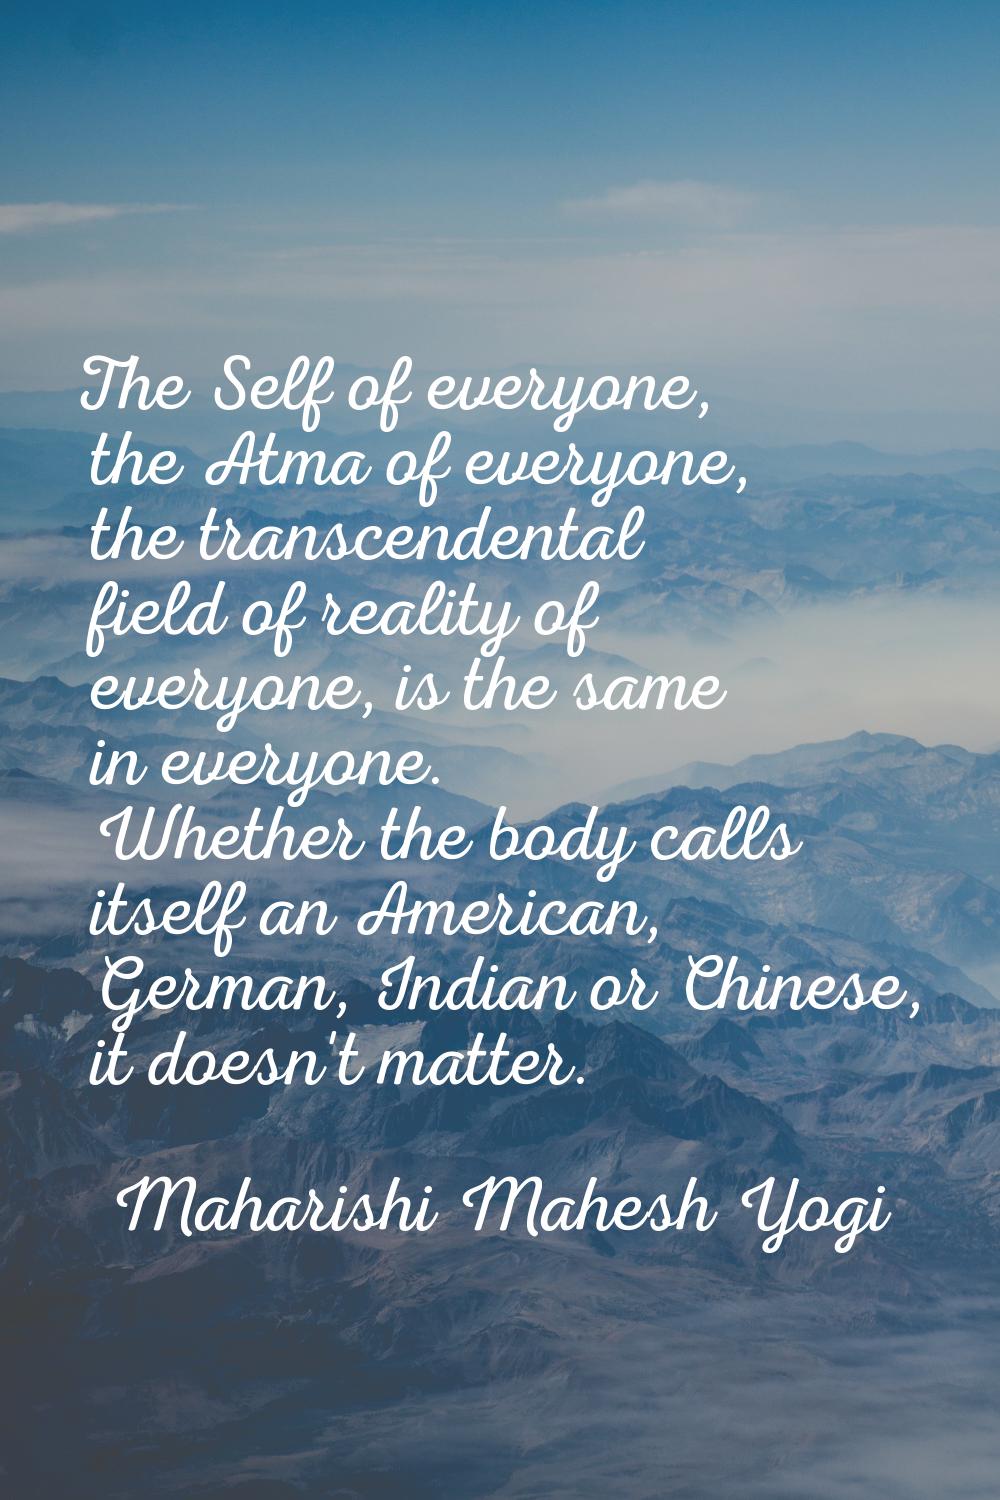 The Self of everyone, the Atma of everyone, the transcendental field of reality of everyone, is the